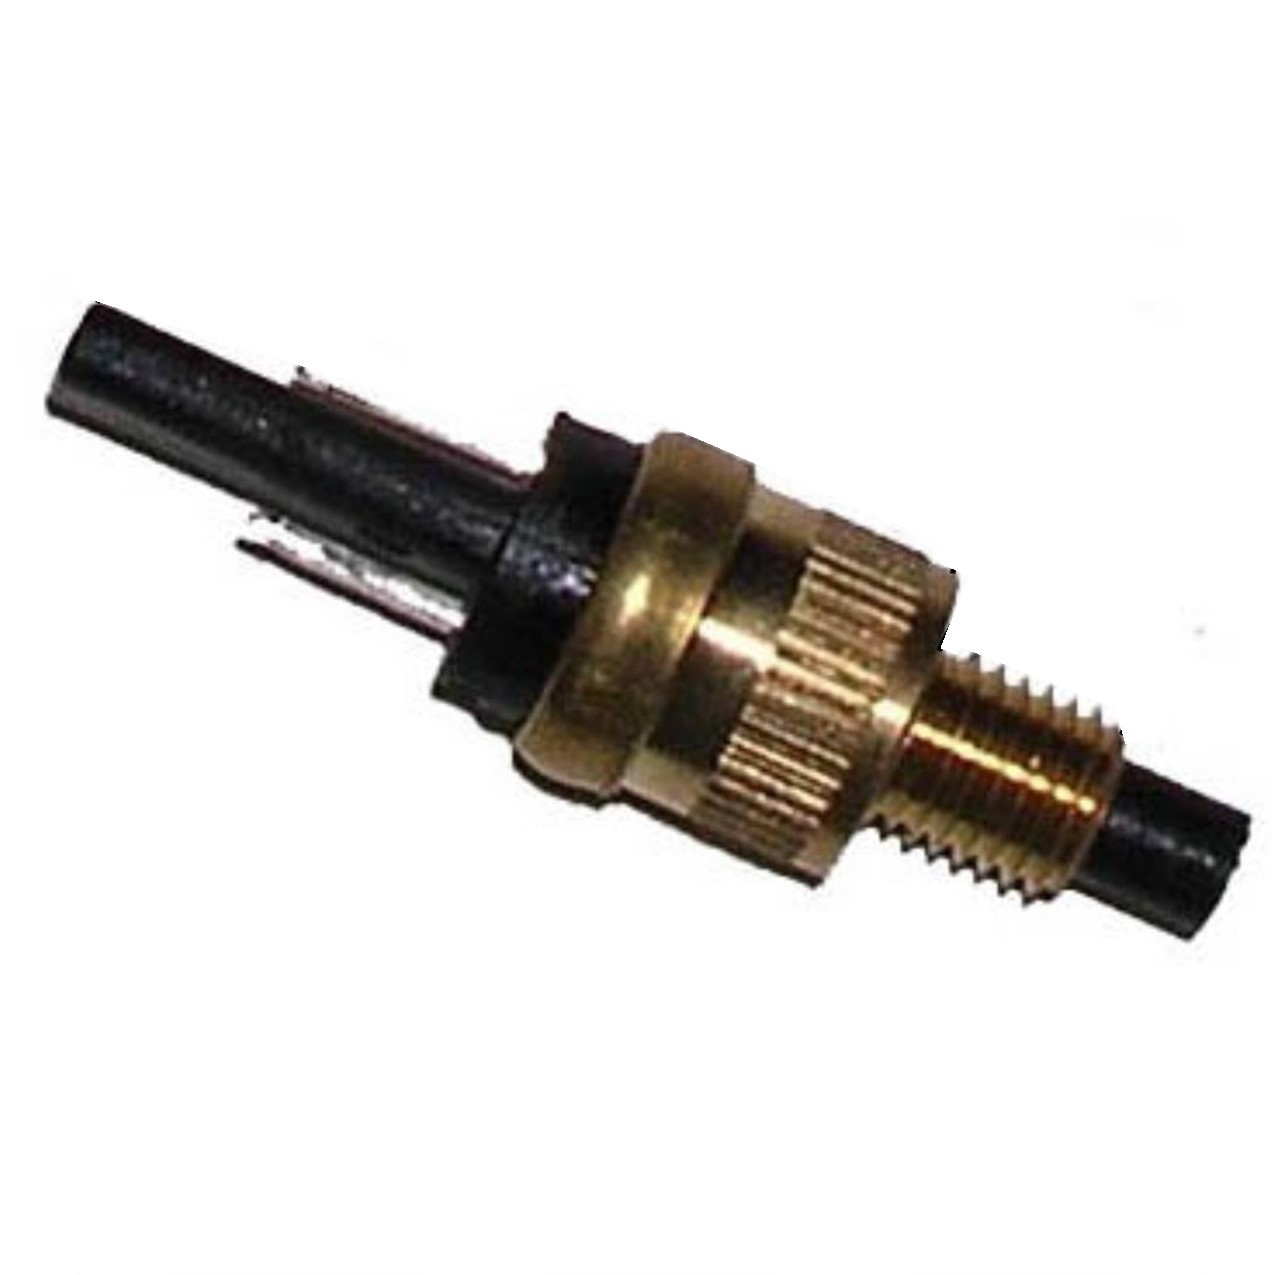 BRAKE SWITCH (MOPED) Threads=6mm Base to Tip=9mm Out=Closed, In=Open Circuit - Click Image to Close